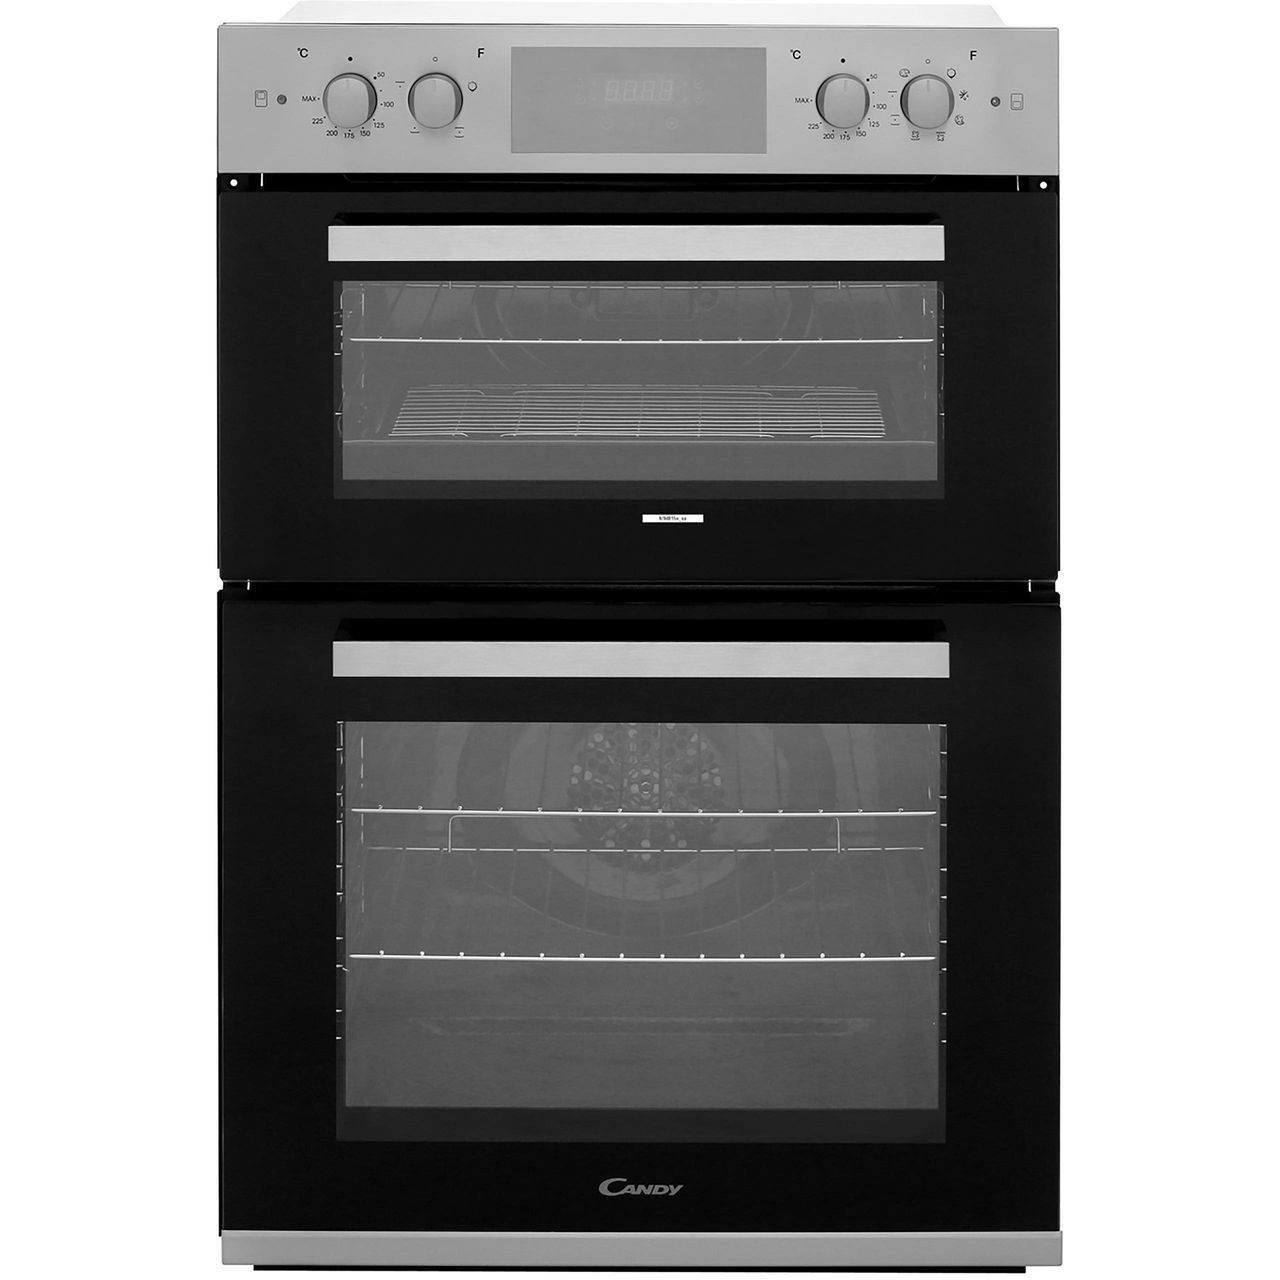 Candy FC9D815X Built In Double Oven Review